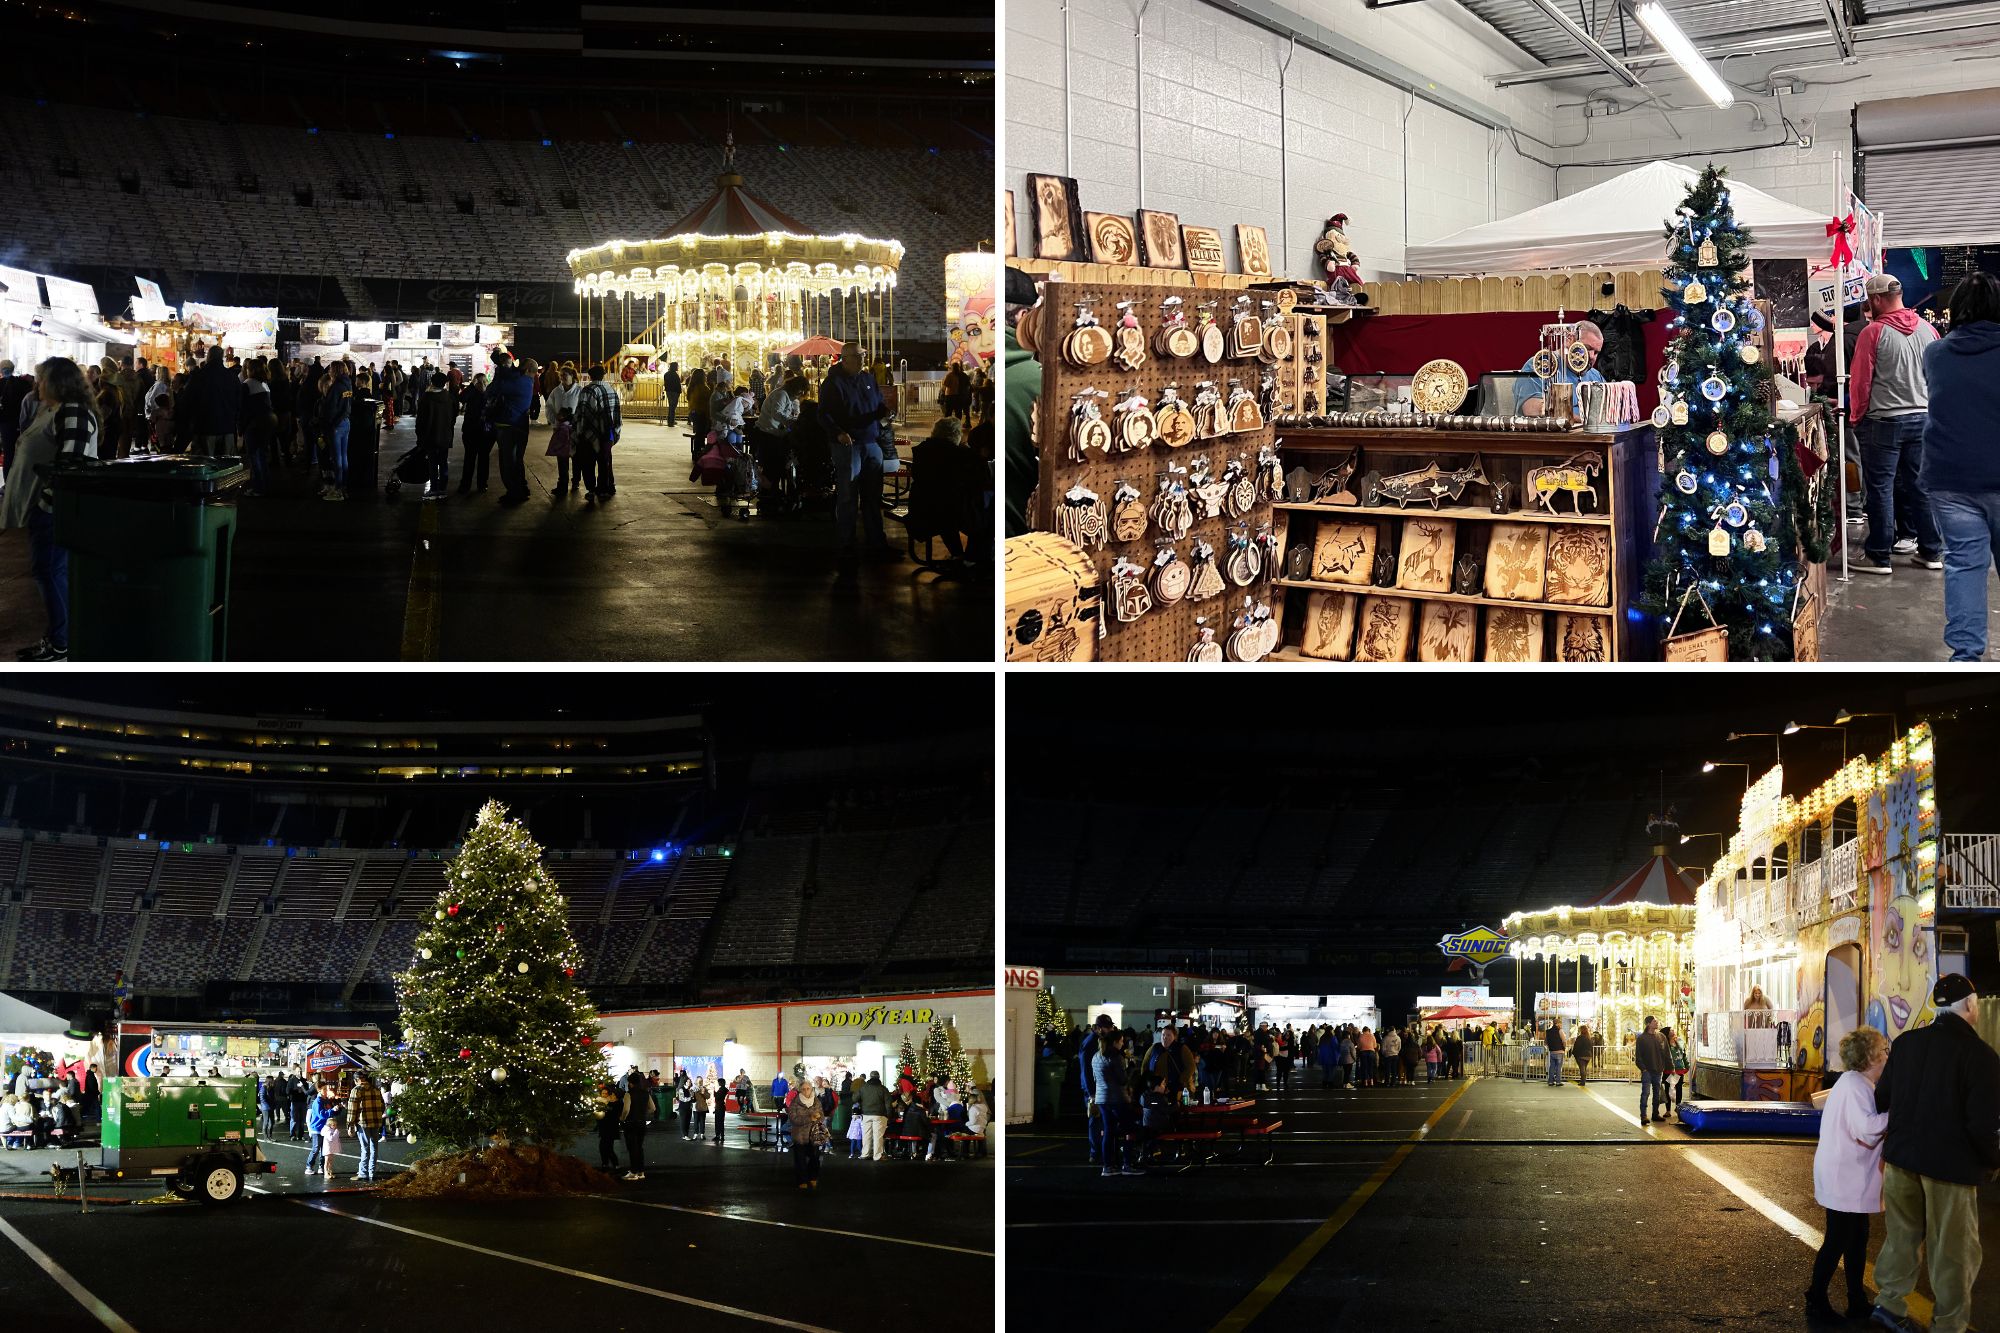 Images from Pinnacle Speedway in Lights' Christmas Village